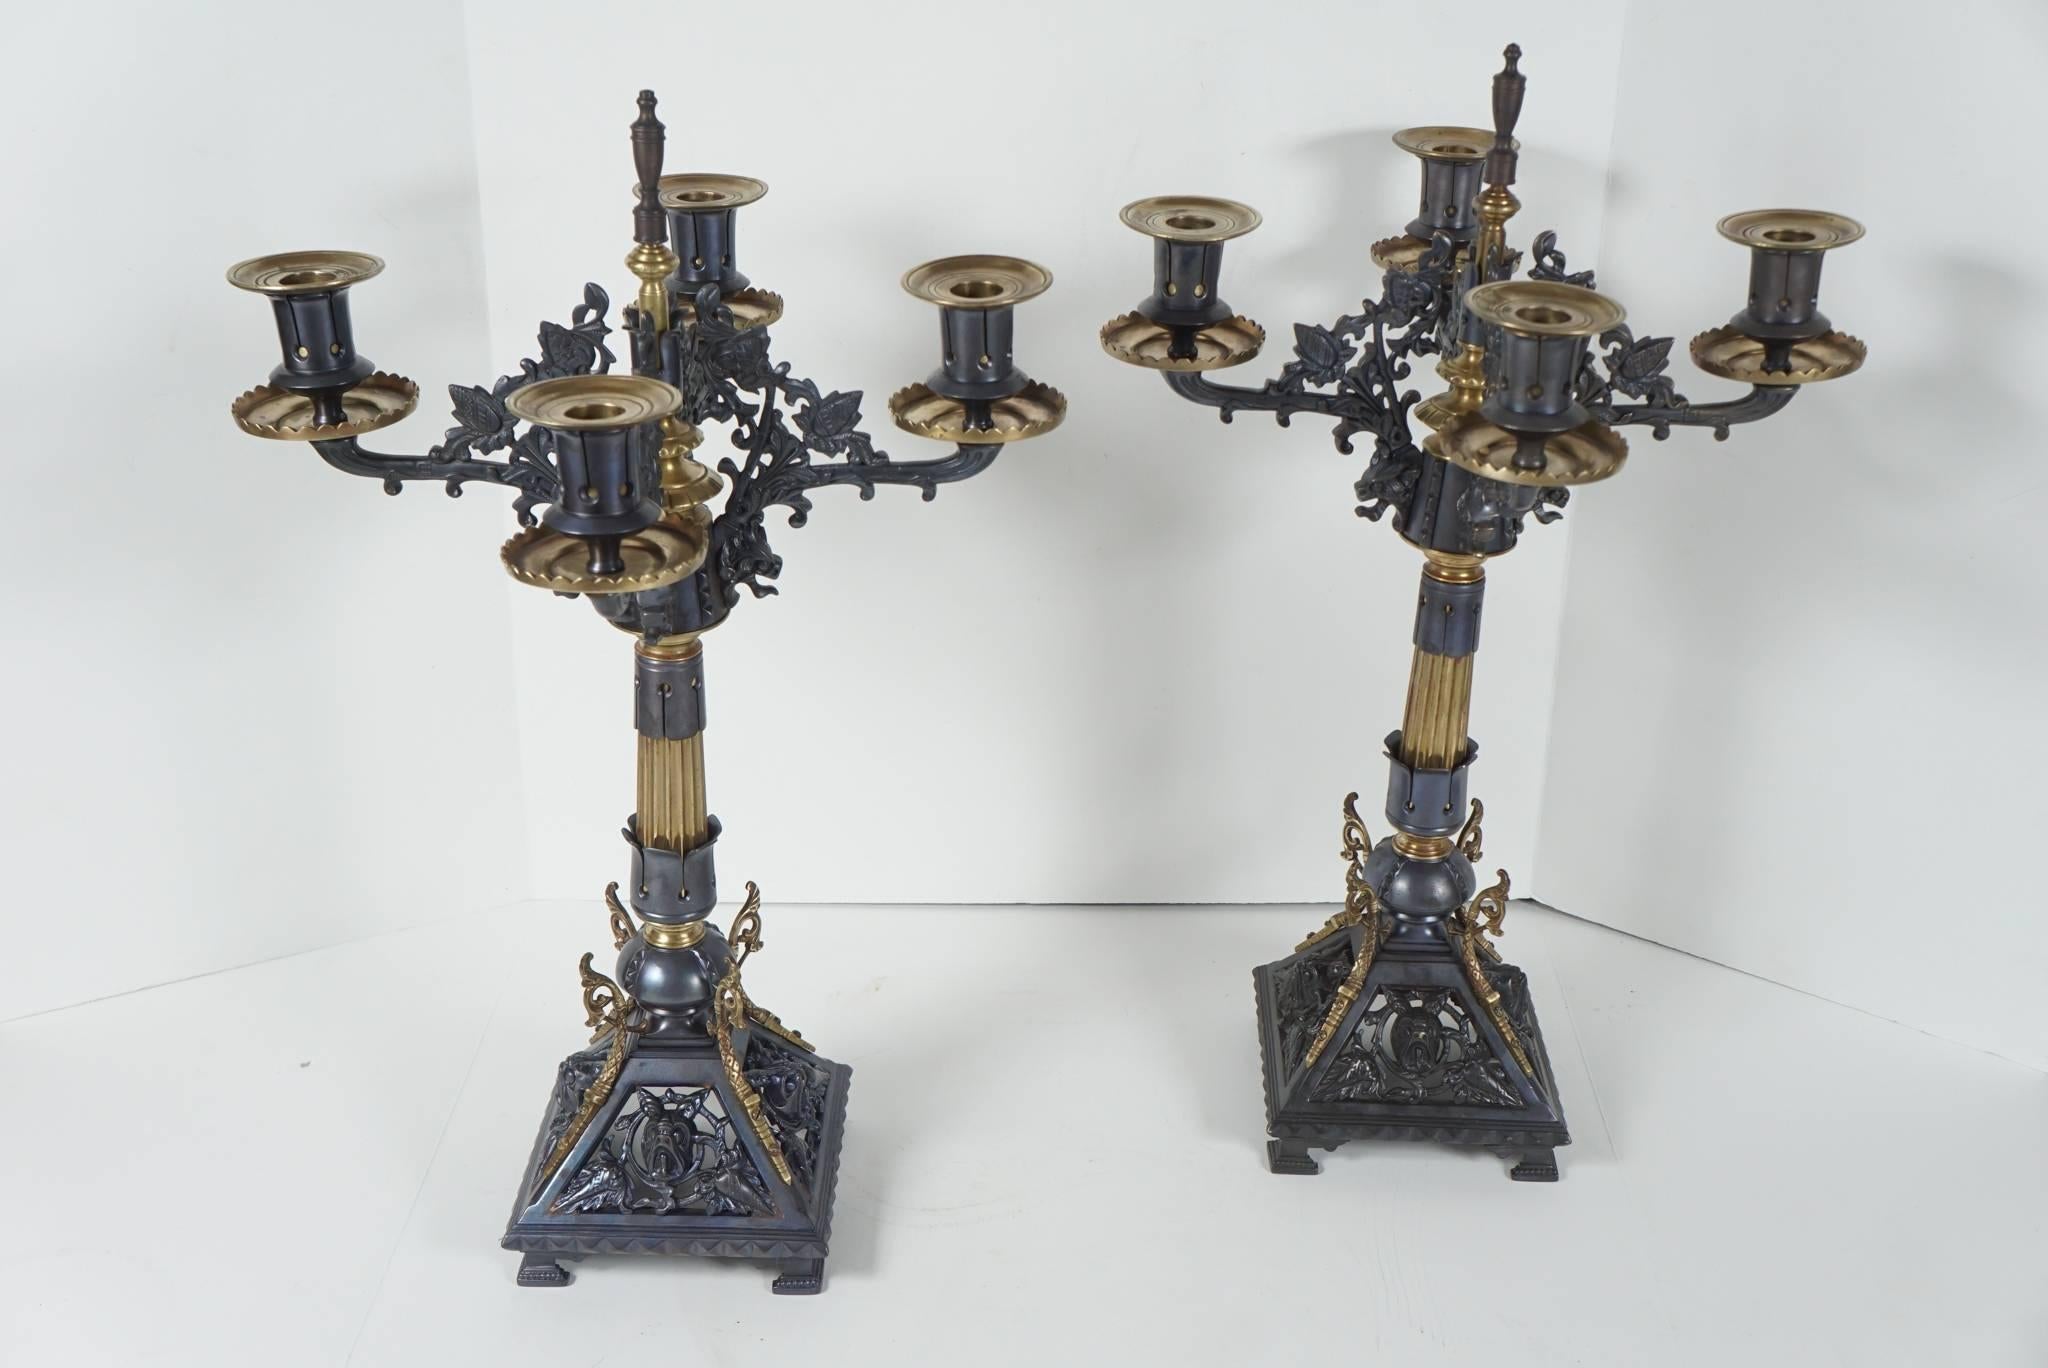 This pair of candelabra made in France, circa 1880 are designed in the Renaissance Revival style. Well cast in a large number of separate parts and patinated and polished to create drama and decorative detail the pair is of a nice scale without